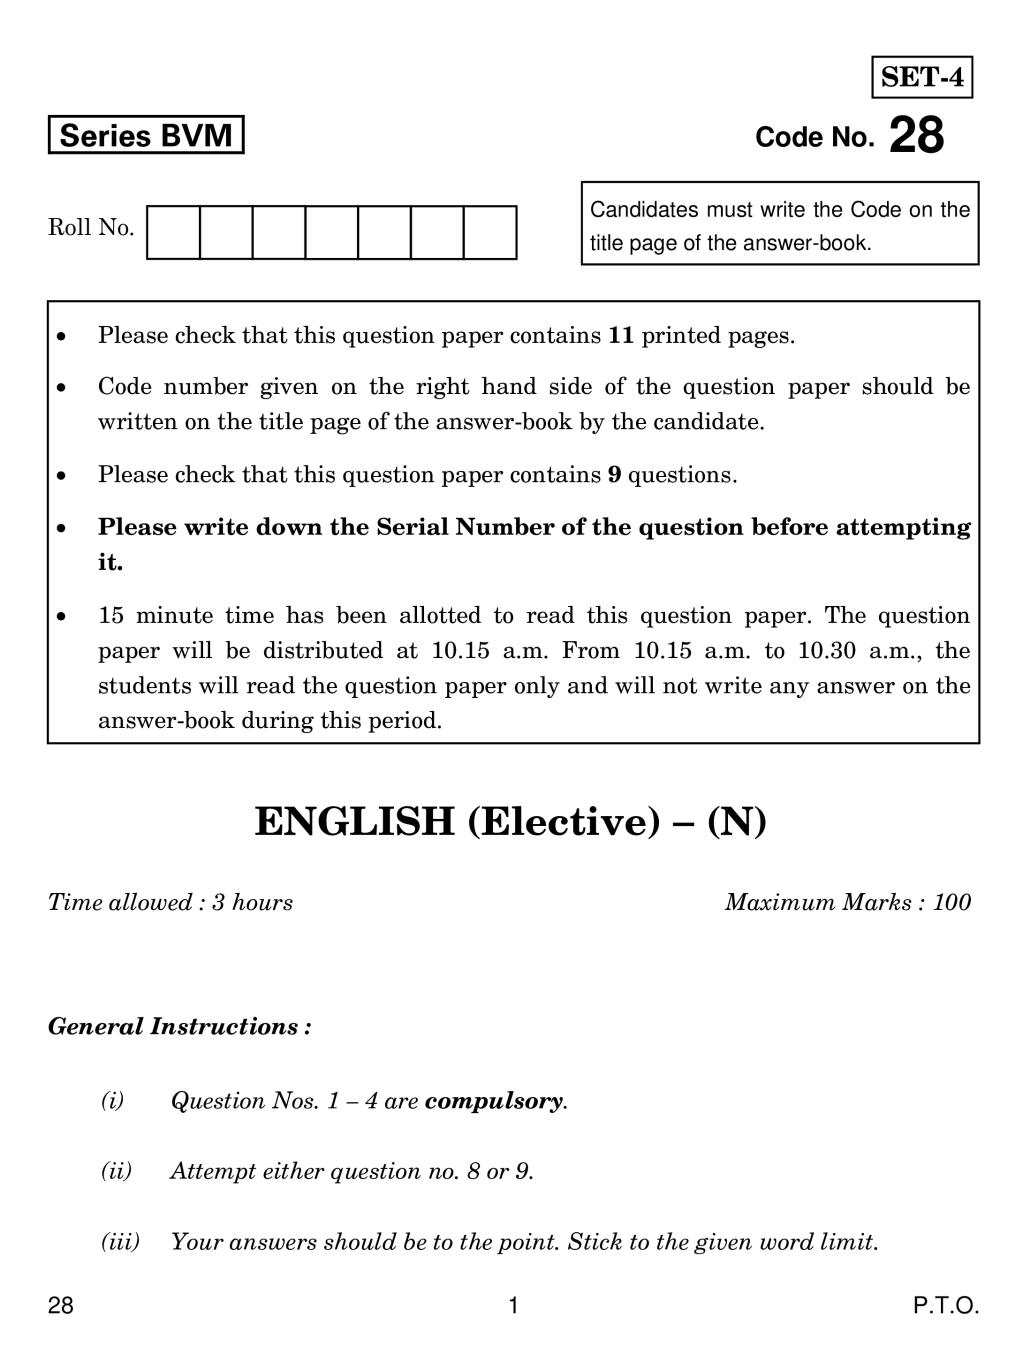 CBSE Class 12 English Elective N Question Paper 2019 - Page 1